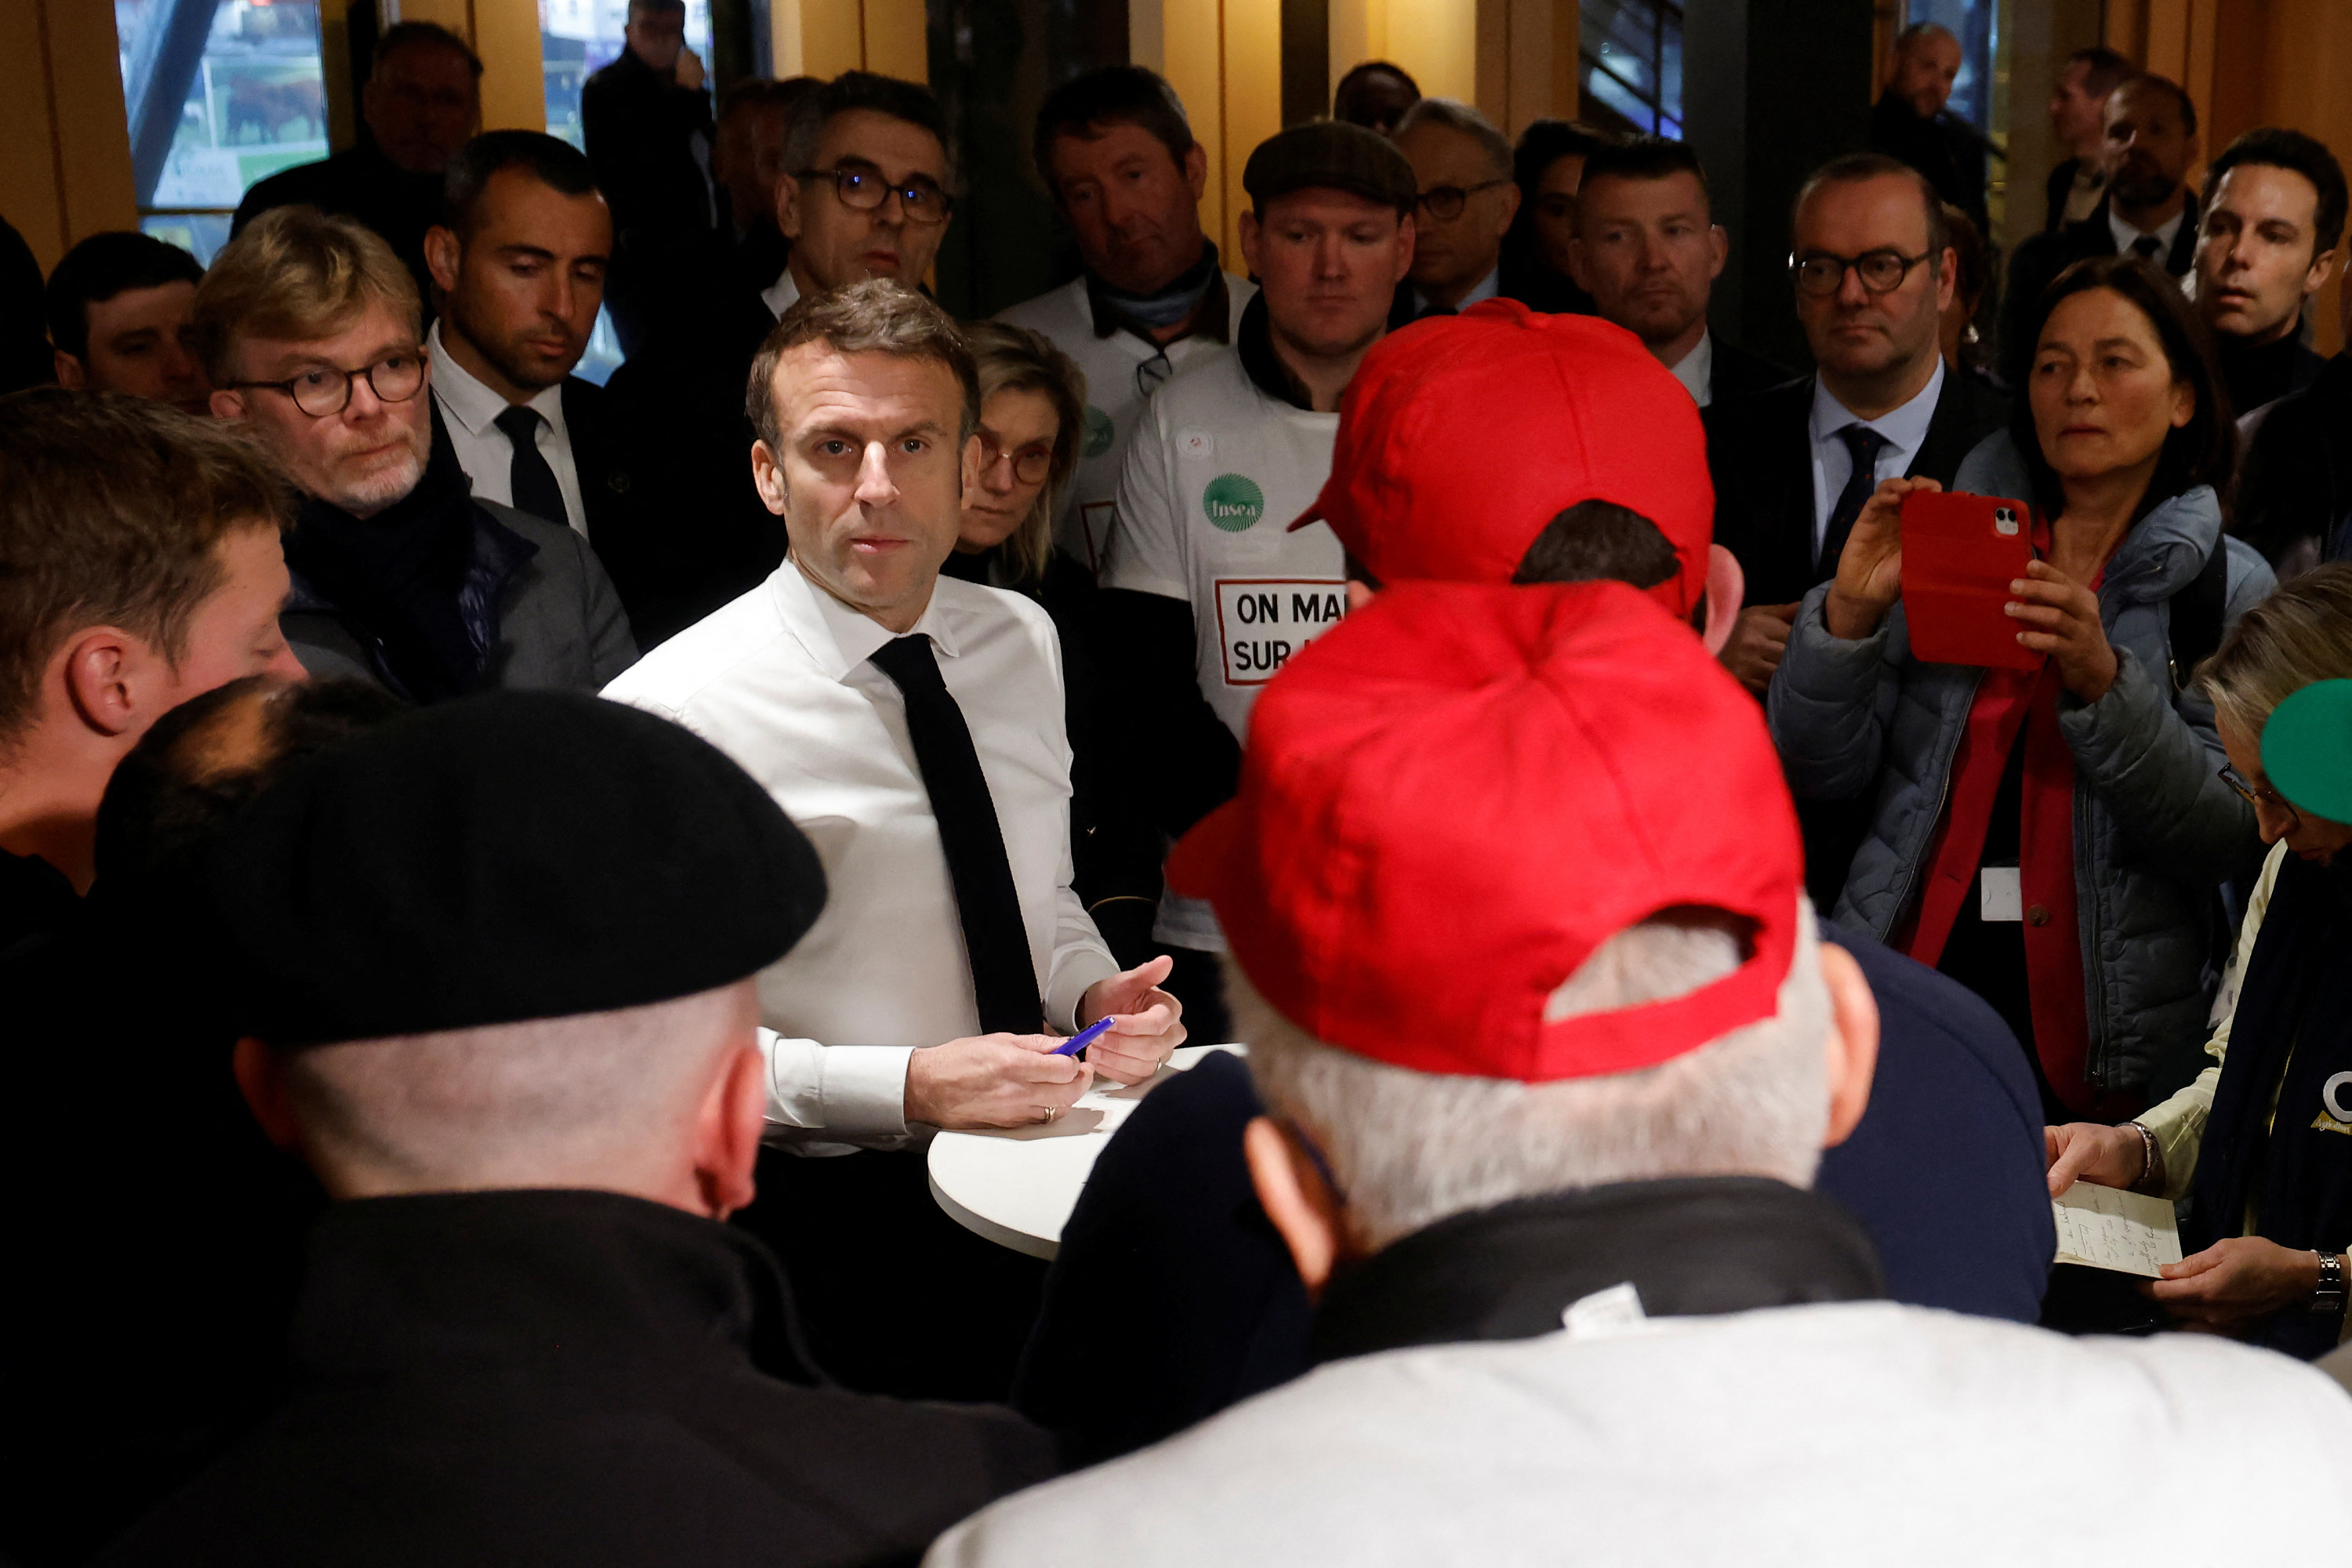 Anger of farmers: Emmanuel Macron pleads for a floor price, already suggested by distributors